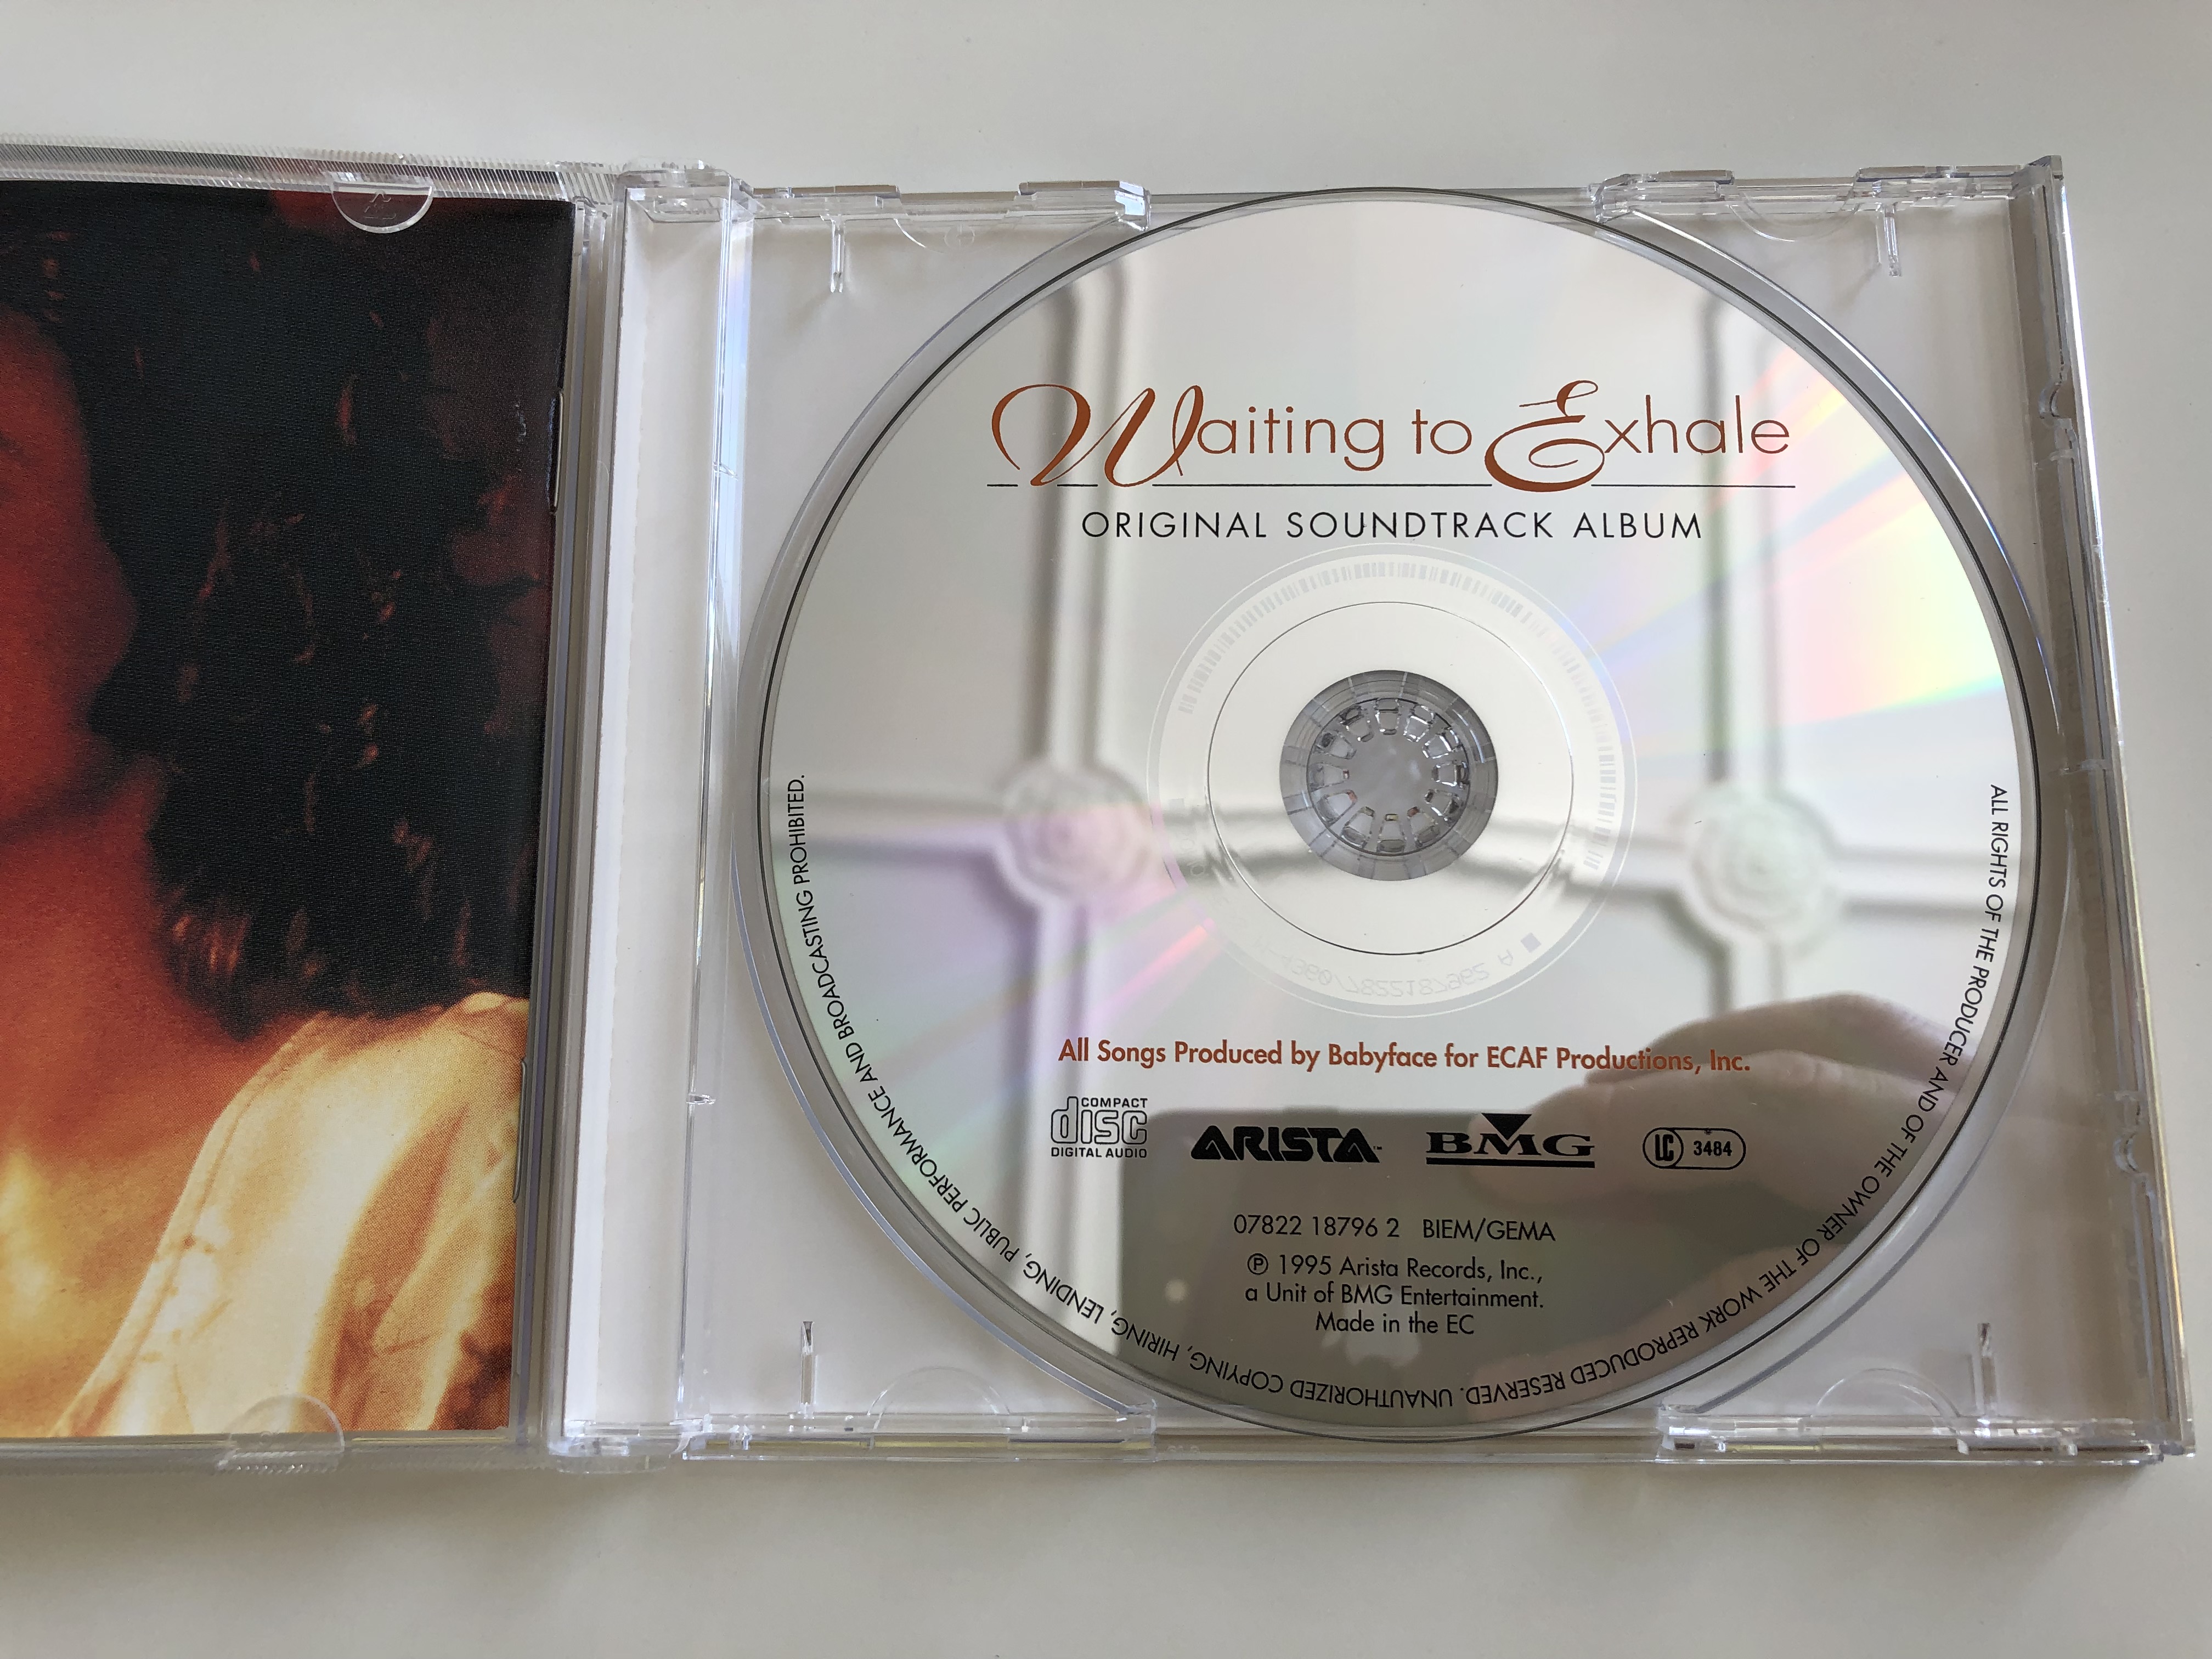 waiting-to-exhale-original-soundtrack-album-includes-new-music-by-whitney-houston-mary-j.-blige-toni-braxton-aretha-franklin-audio-cd-1995-arista-records-2-.jpg